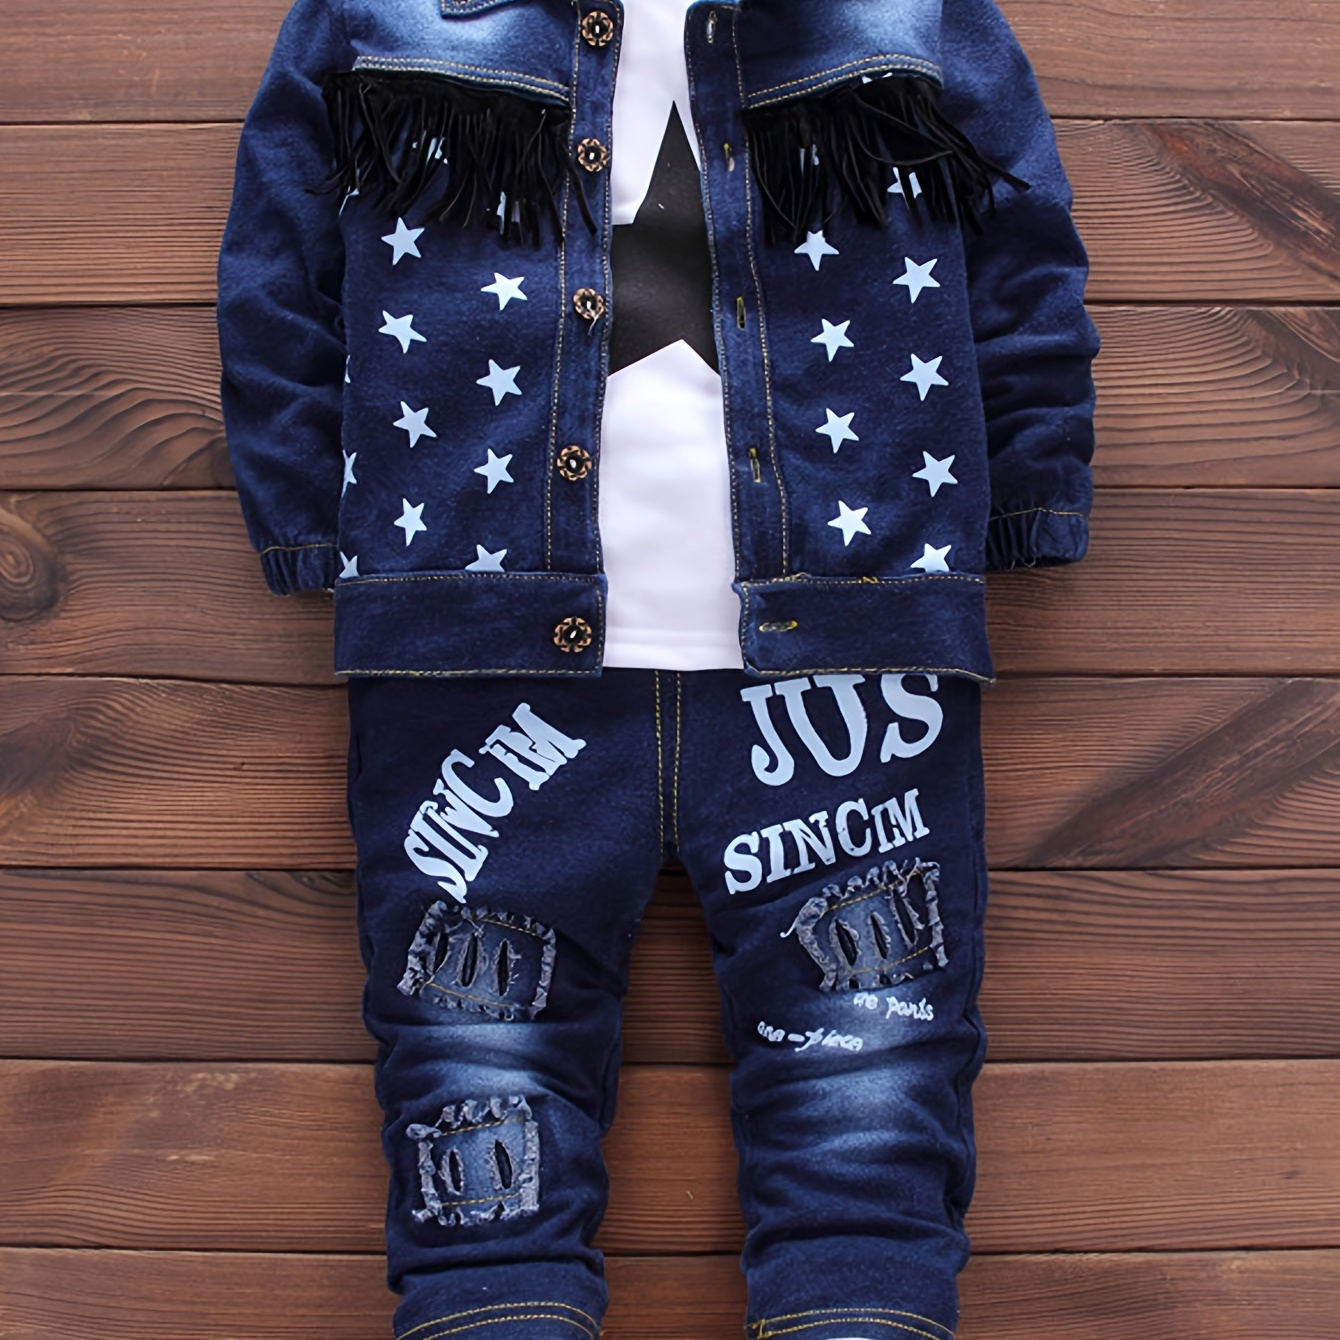 

Baby Boys 2-piece Outfit Set, Fashion Spring/autumn Casual Denim Jacket With Tassels And Jeans, Star Pattern, Denim Clothing